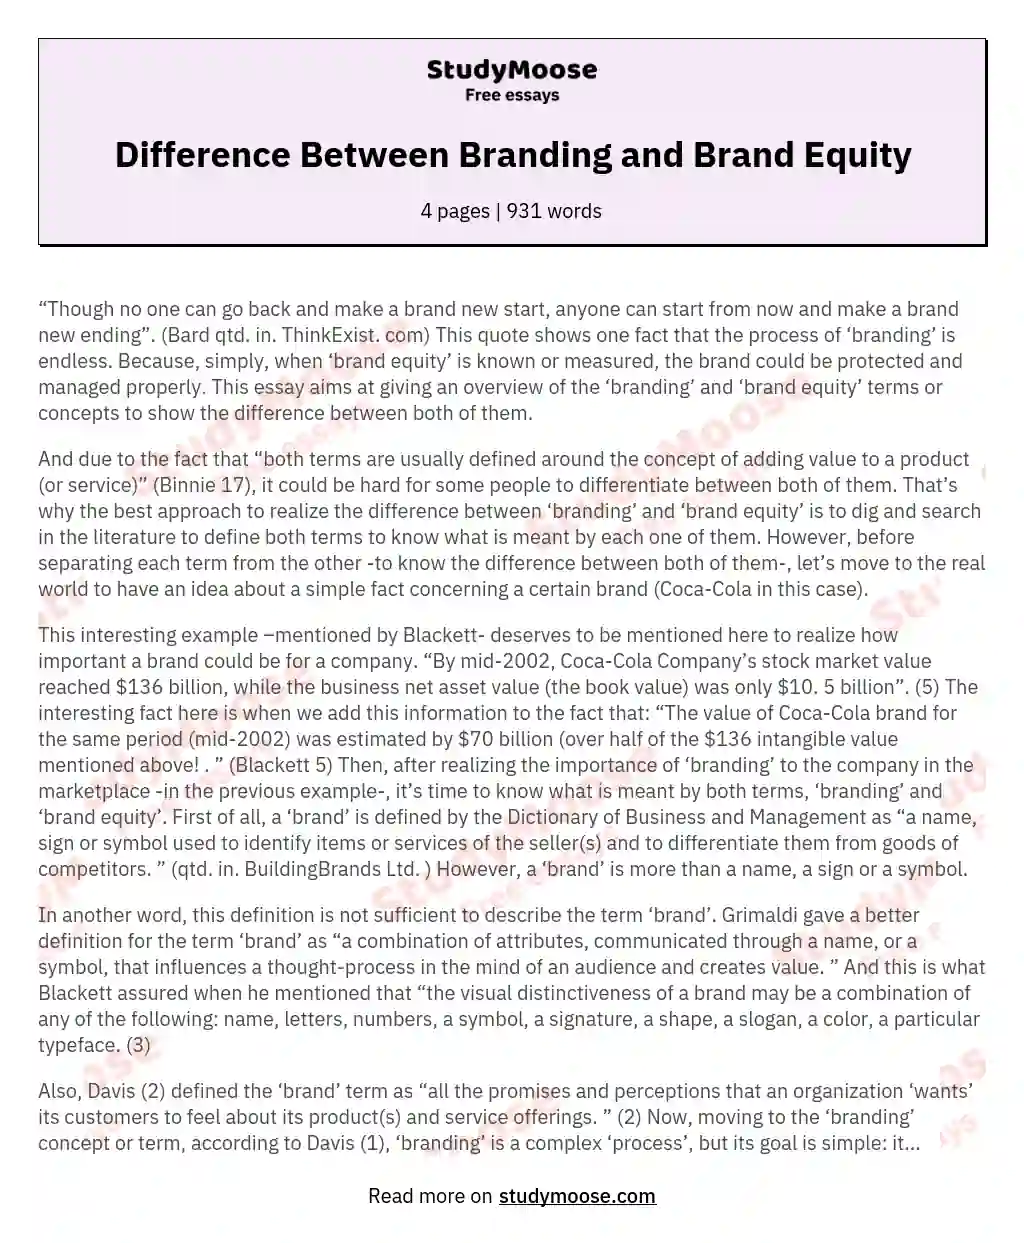 Difference Between Branding and Brand Equity essay